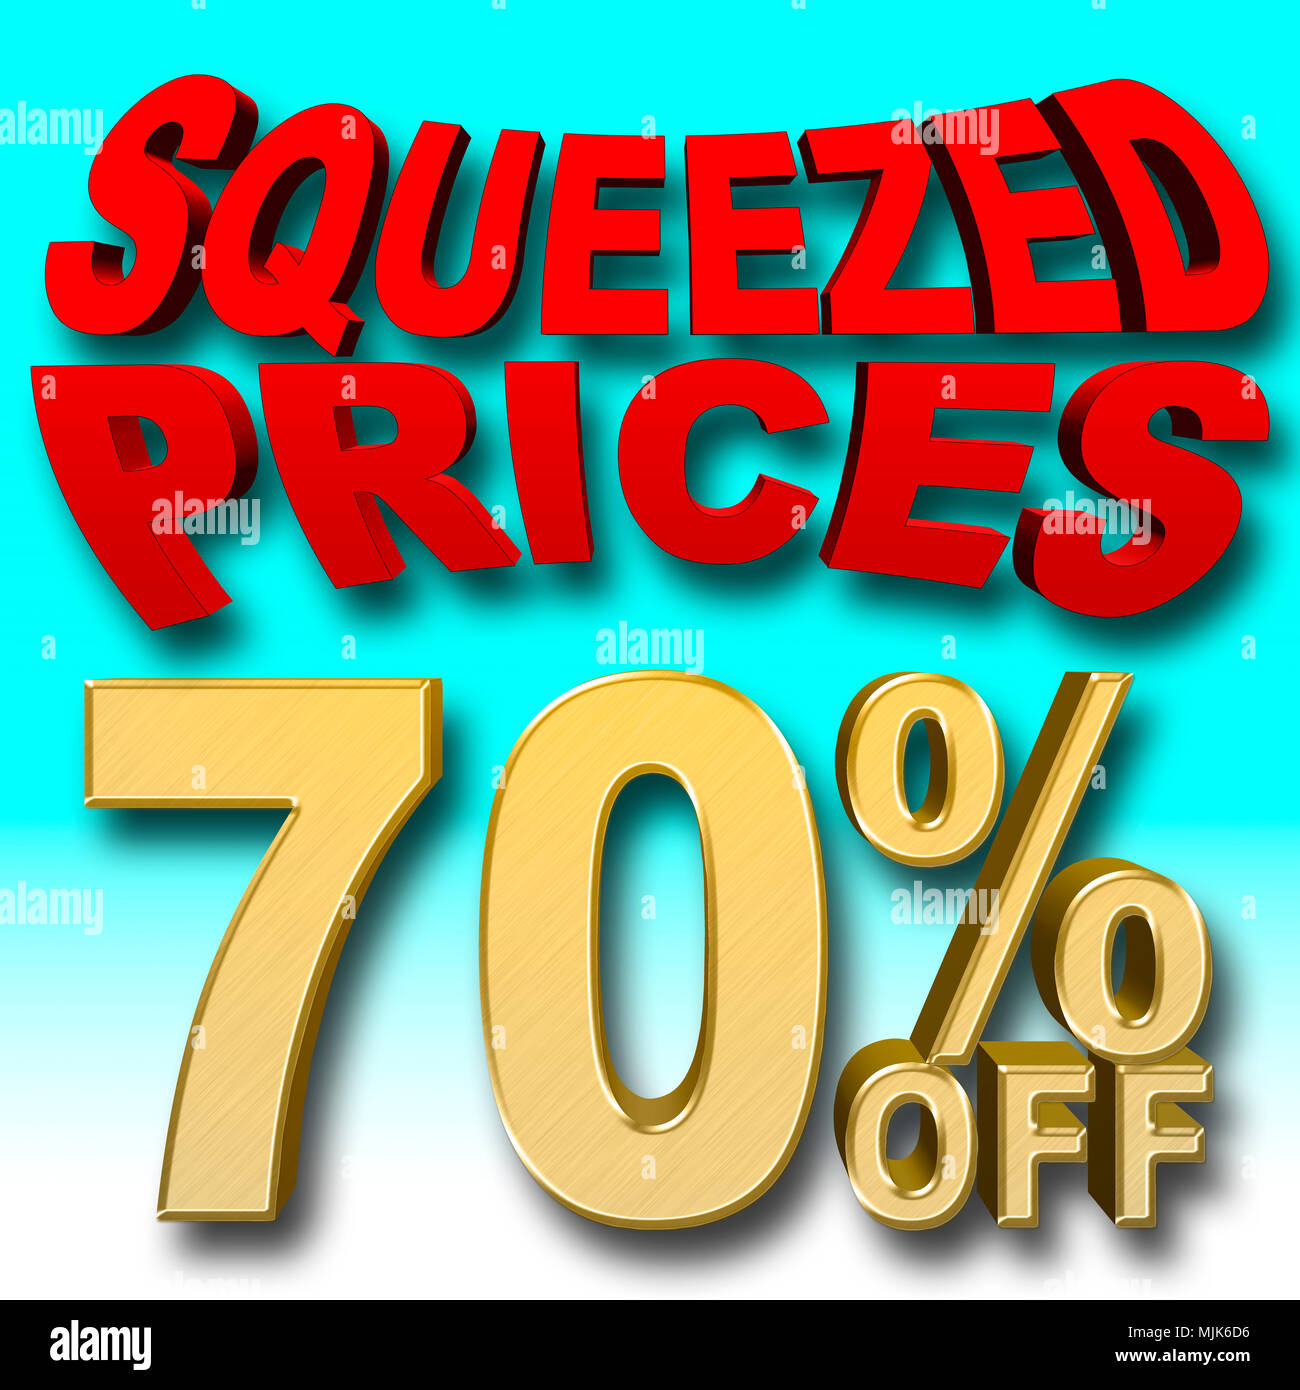 Stock Illustration - Golden Text: 70 Percentage Off, Red Text: Squeezed Prices, 3D Illustration, Blue Gradient Background, Different. Stock Photo